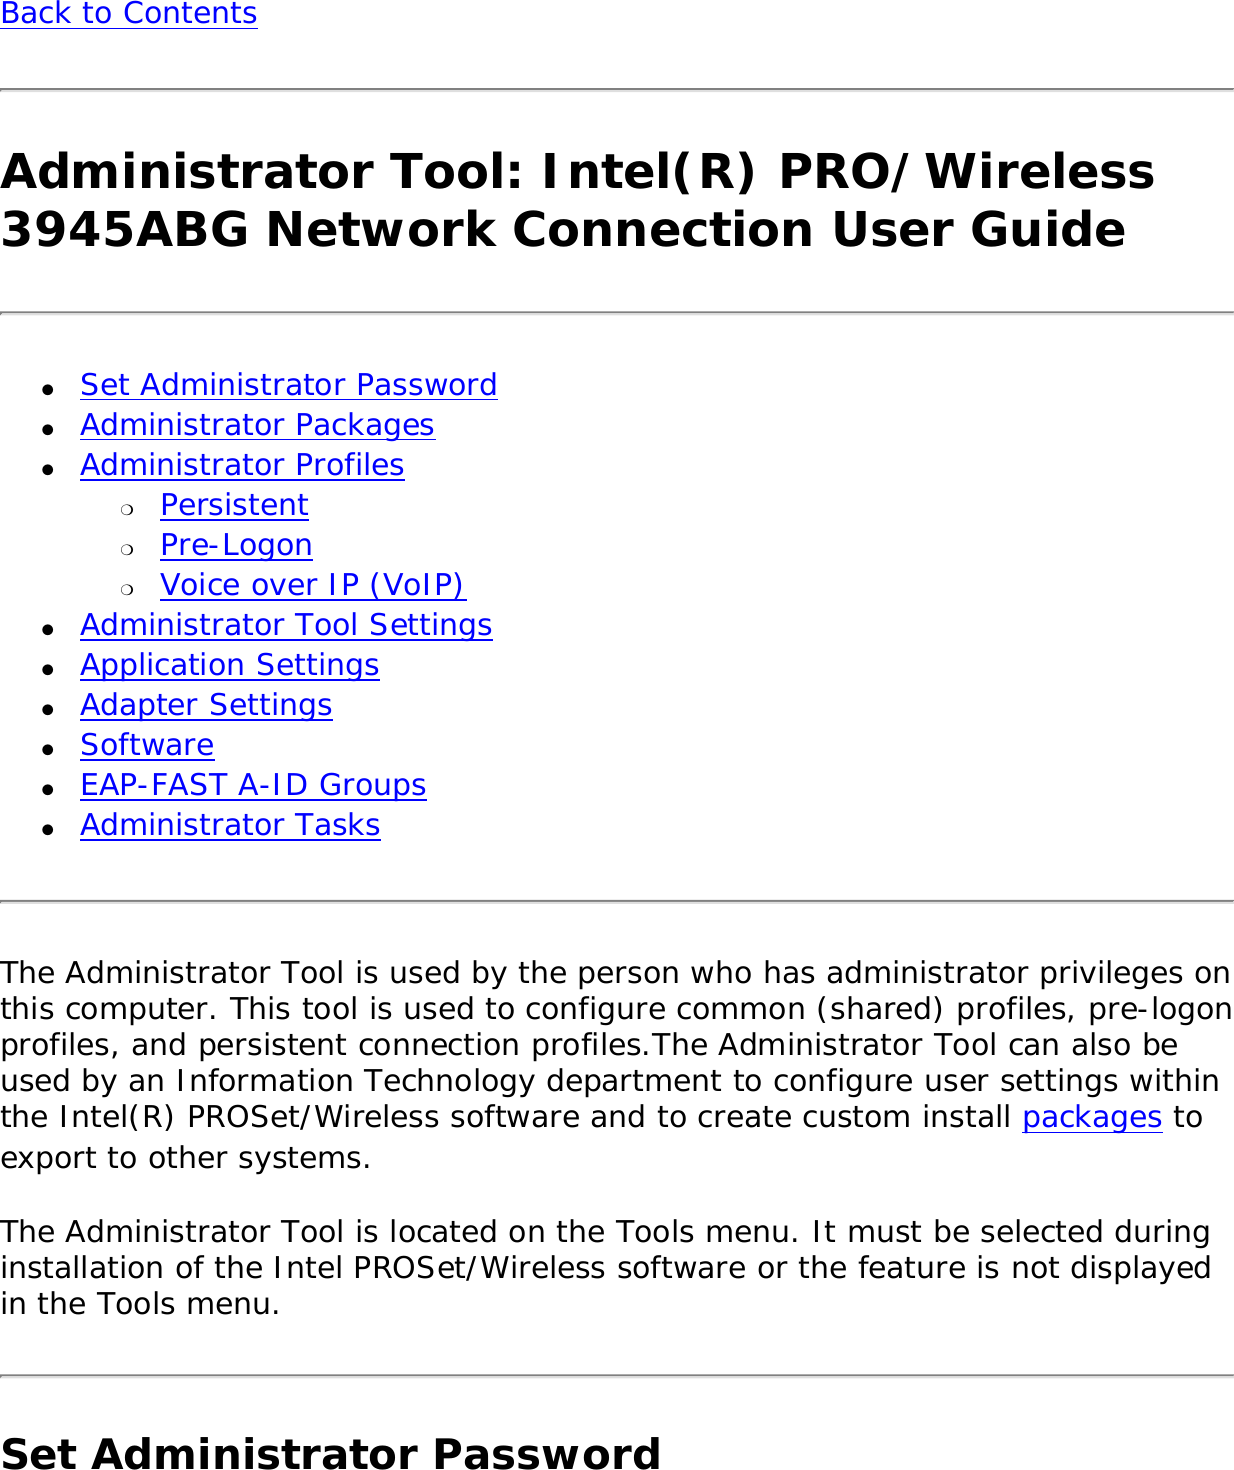 Back to Contents Administrator Tool: Intel(R) PRO/Wireless 3945ABG Network Connection User Guide●     Set Administrator Password ●     Administrator Packages ●     Administrator Profiles ❍     Persistent❍     Pre-Logon❍     Voice over IP (VoIP) ●     Administrator Tool Settings ●     Application Settings ●     Adapter Settings●     Software●     EAP-FAST A-ID Groups●     Administrator TasksThe Administrator Tool is used by the person who has administrator privileges on this computer. This tool is used to configure common (shared) profiles, pre-logon profiles, and persistent connection profiles.The Administrator Tool can also be used by an Information Technology department to configure user settings within the Intel(R) PROSet/Wireless software and to create custom install packages to export to other systems. The Administrator Tool is located on the Tools menu. It must be selected during installation of the Intel PROSet/Wireless software or the feature is not displayed in the Tools menu. Set Administrator Password 